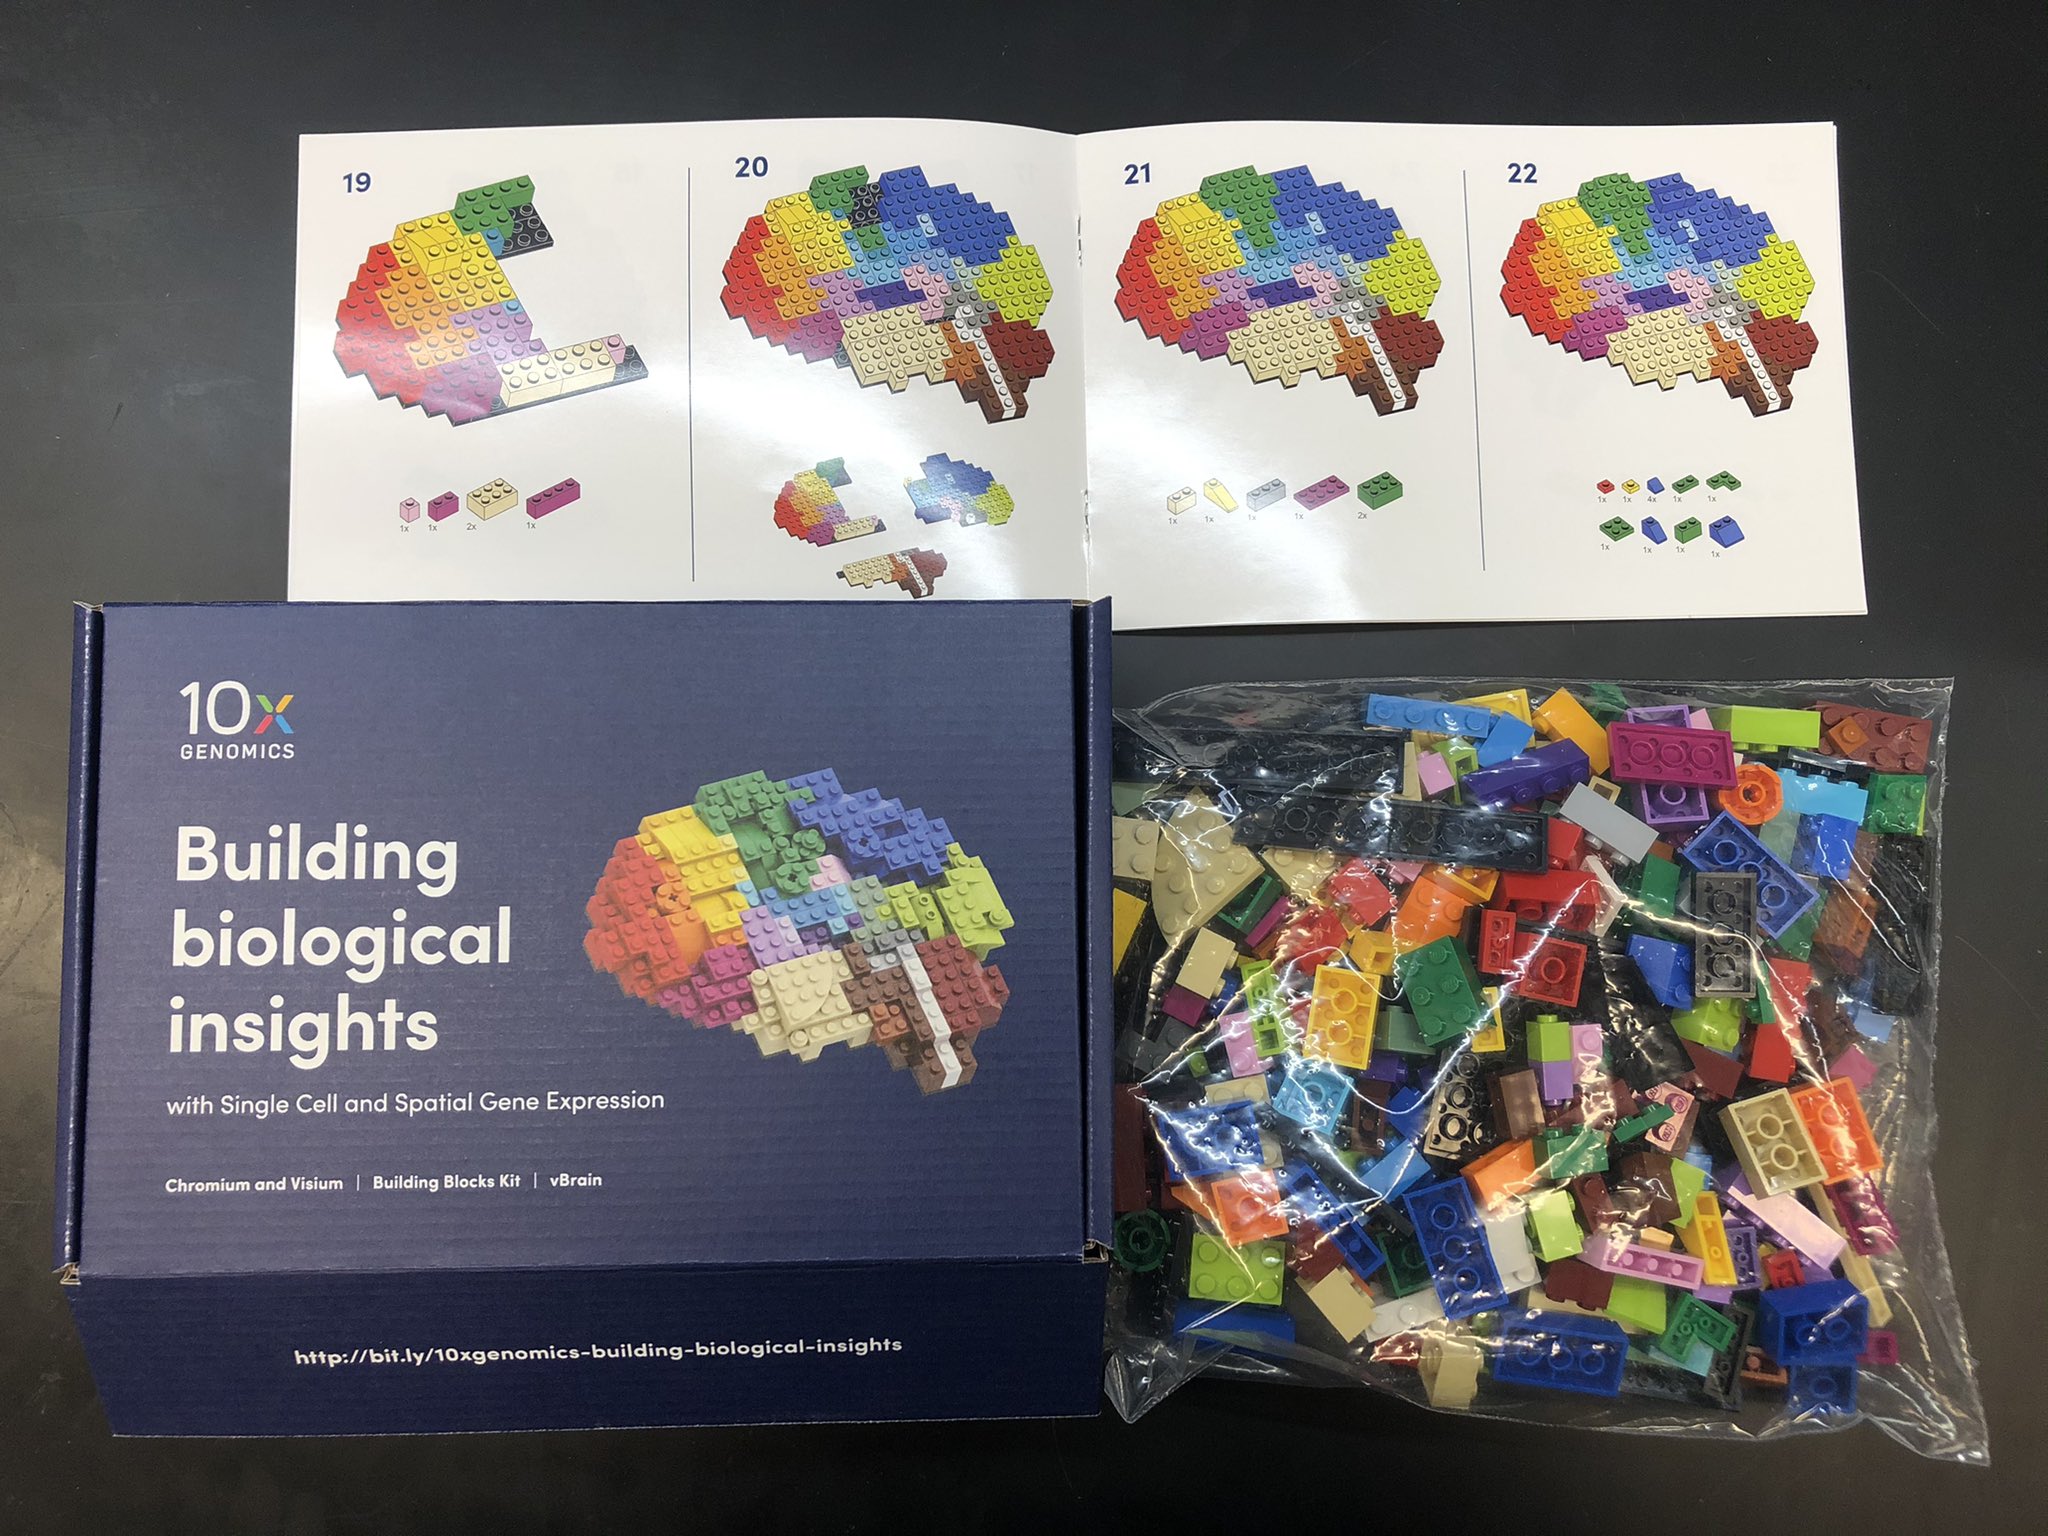 Bo Xia on Twitter: "Just received the new year from @10xGenomics. Thanks so It's amazing that they made my Lego brain (aka lego transcriptomics concept) into a gift box